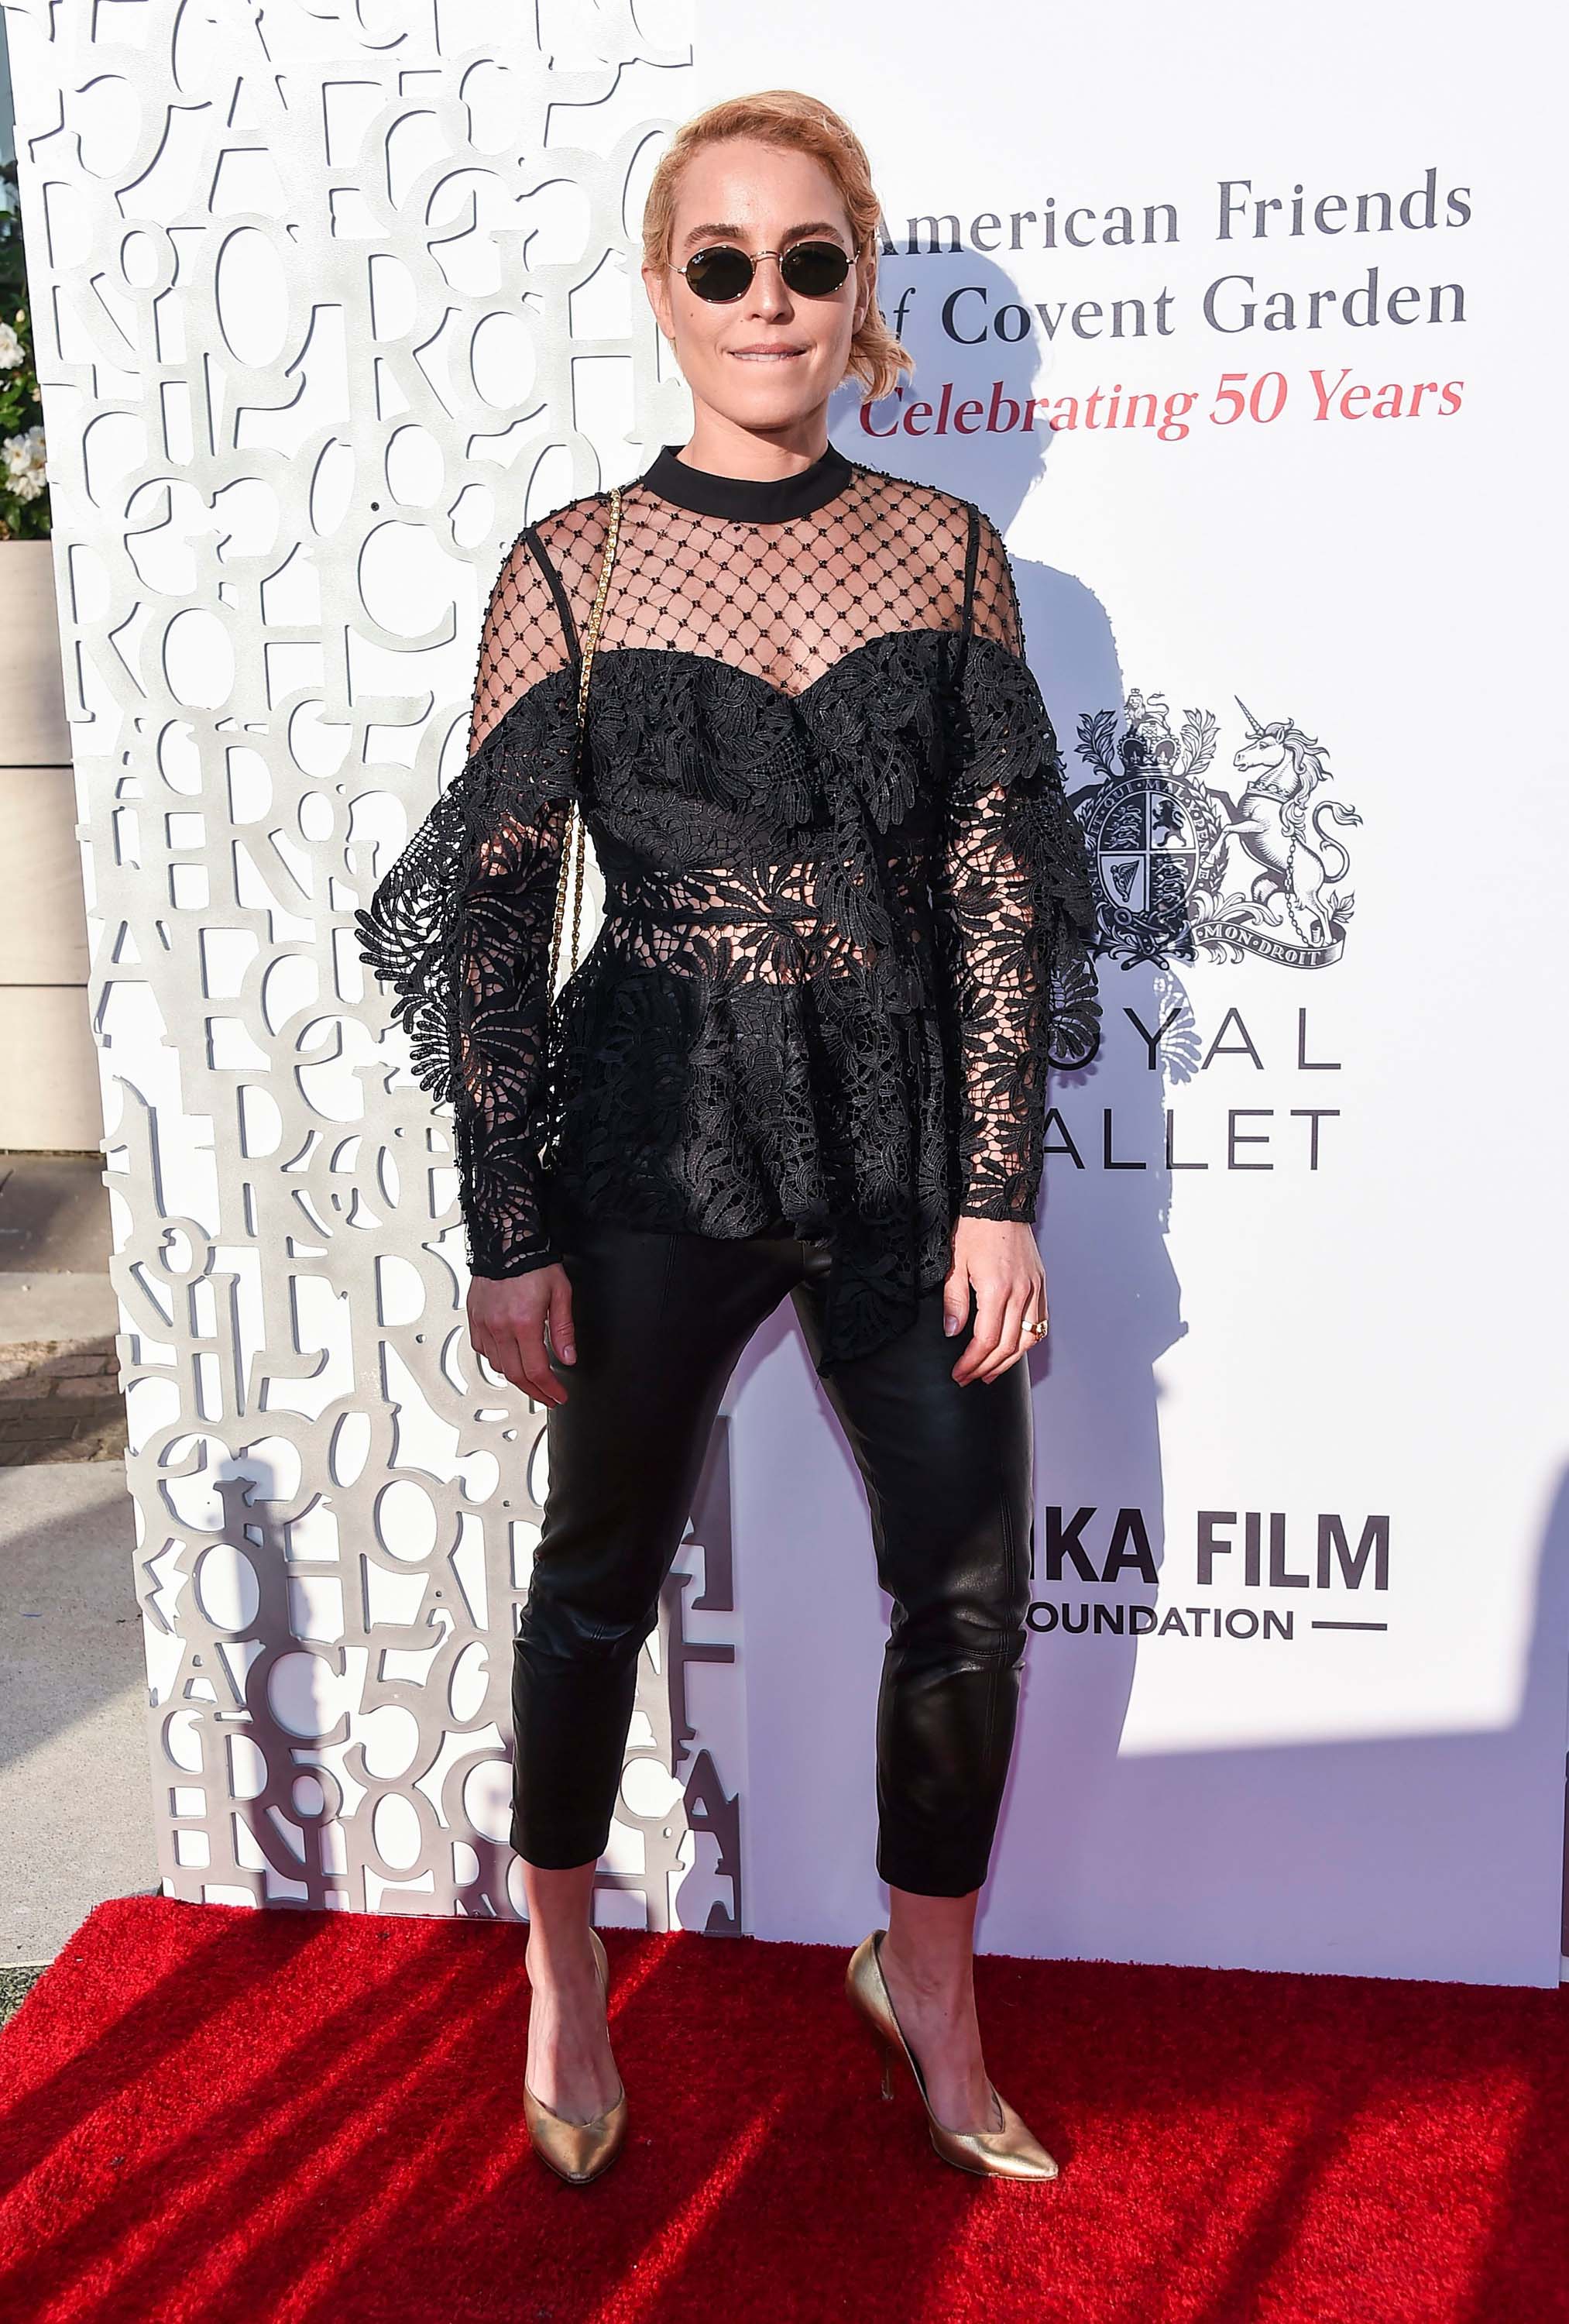 Noomi Rapace attends American Friends of Covent Garden 50th Anniversary Celebration